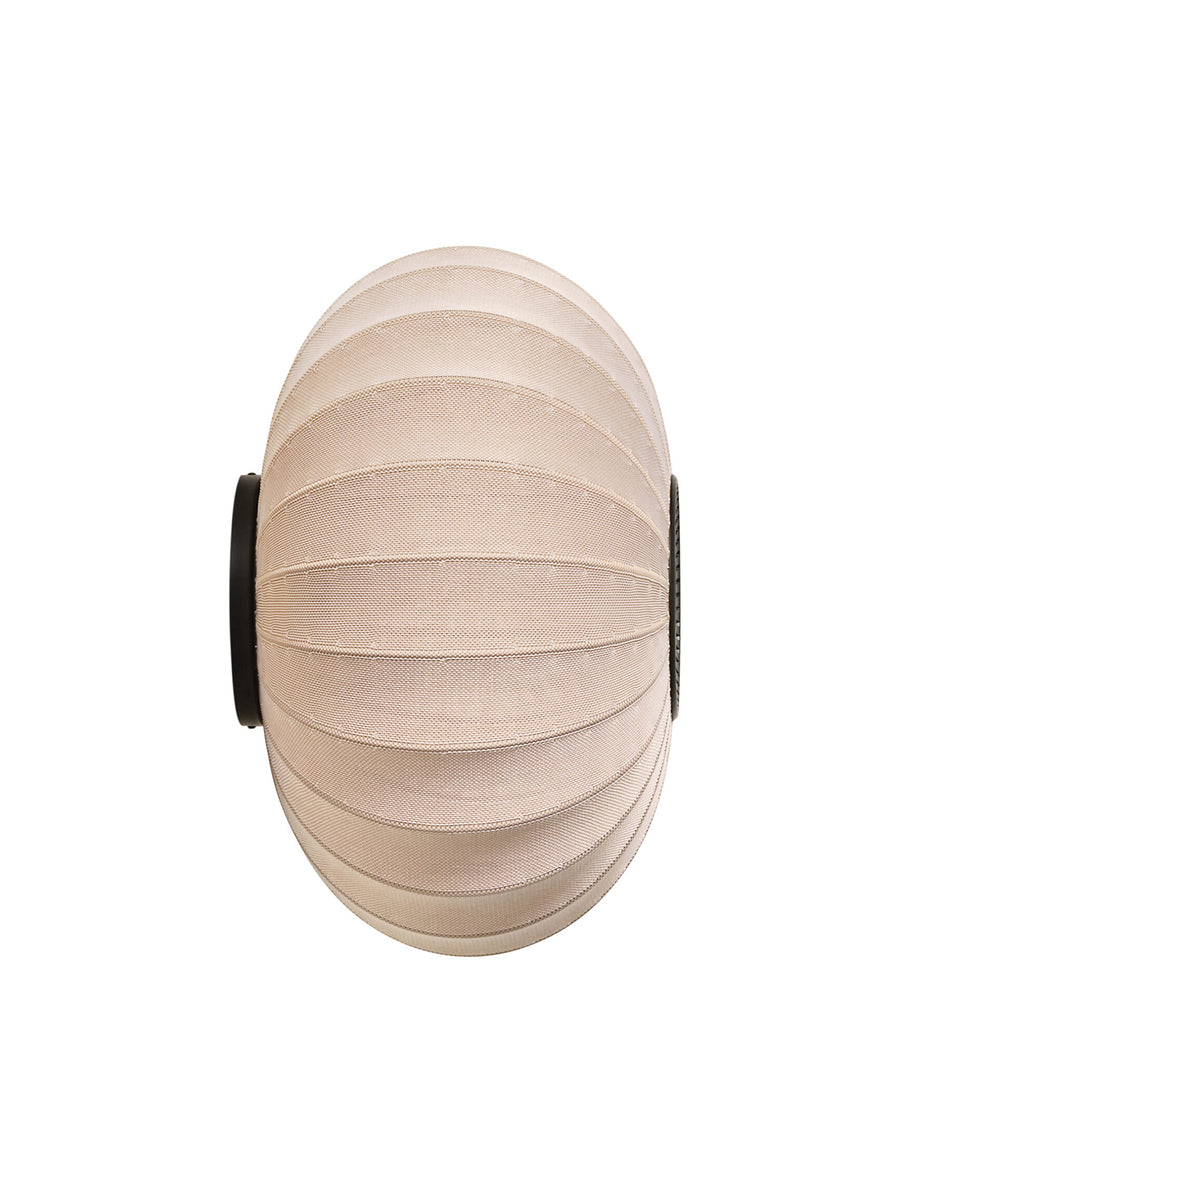 Made by Hand, Knit-Wit Oval Ceiling Wall Lamp 57, Sandstone, Wall / Sconce,